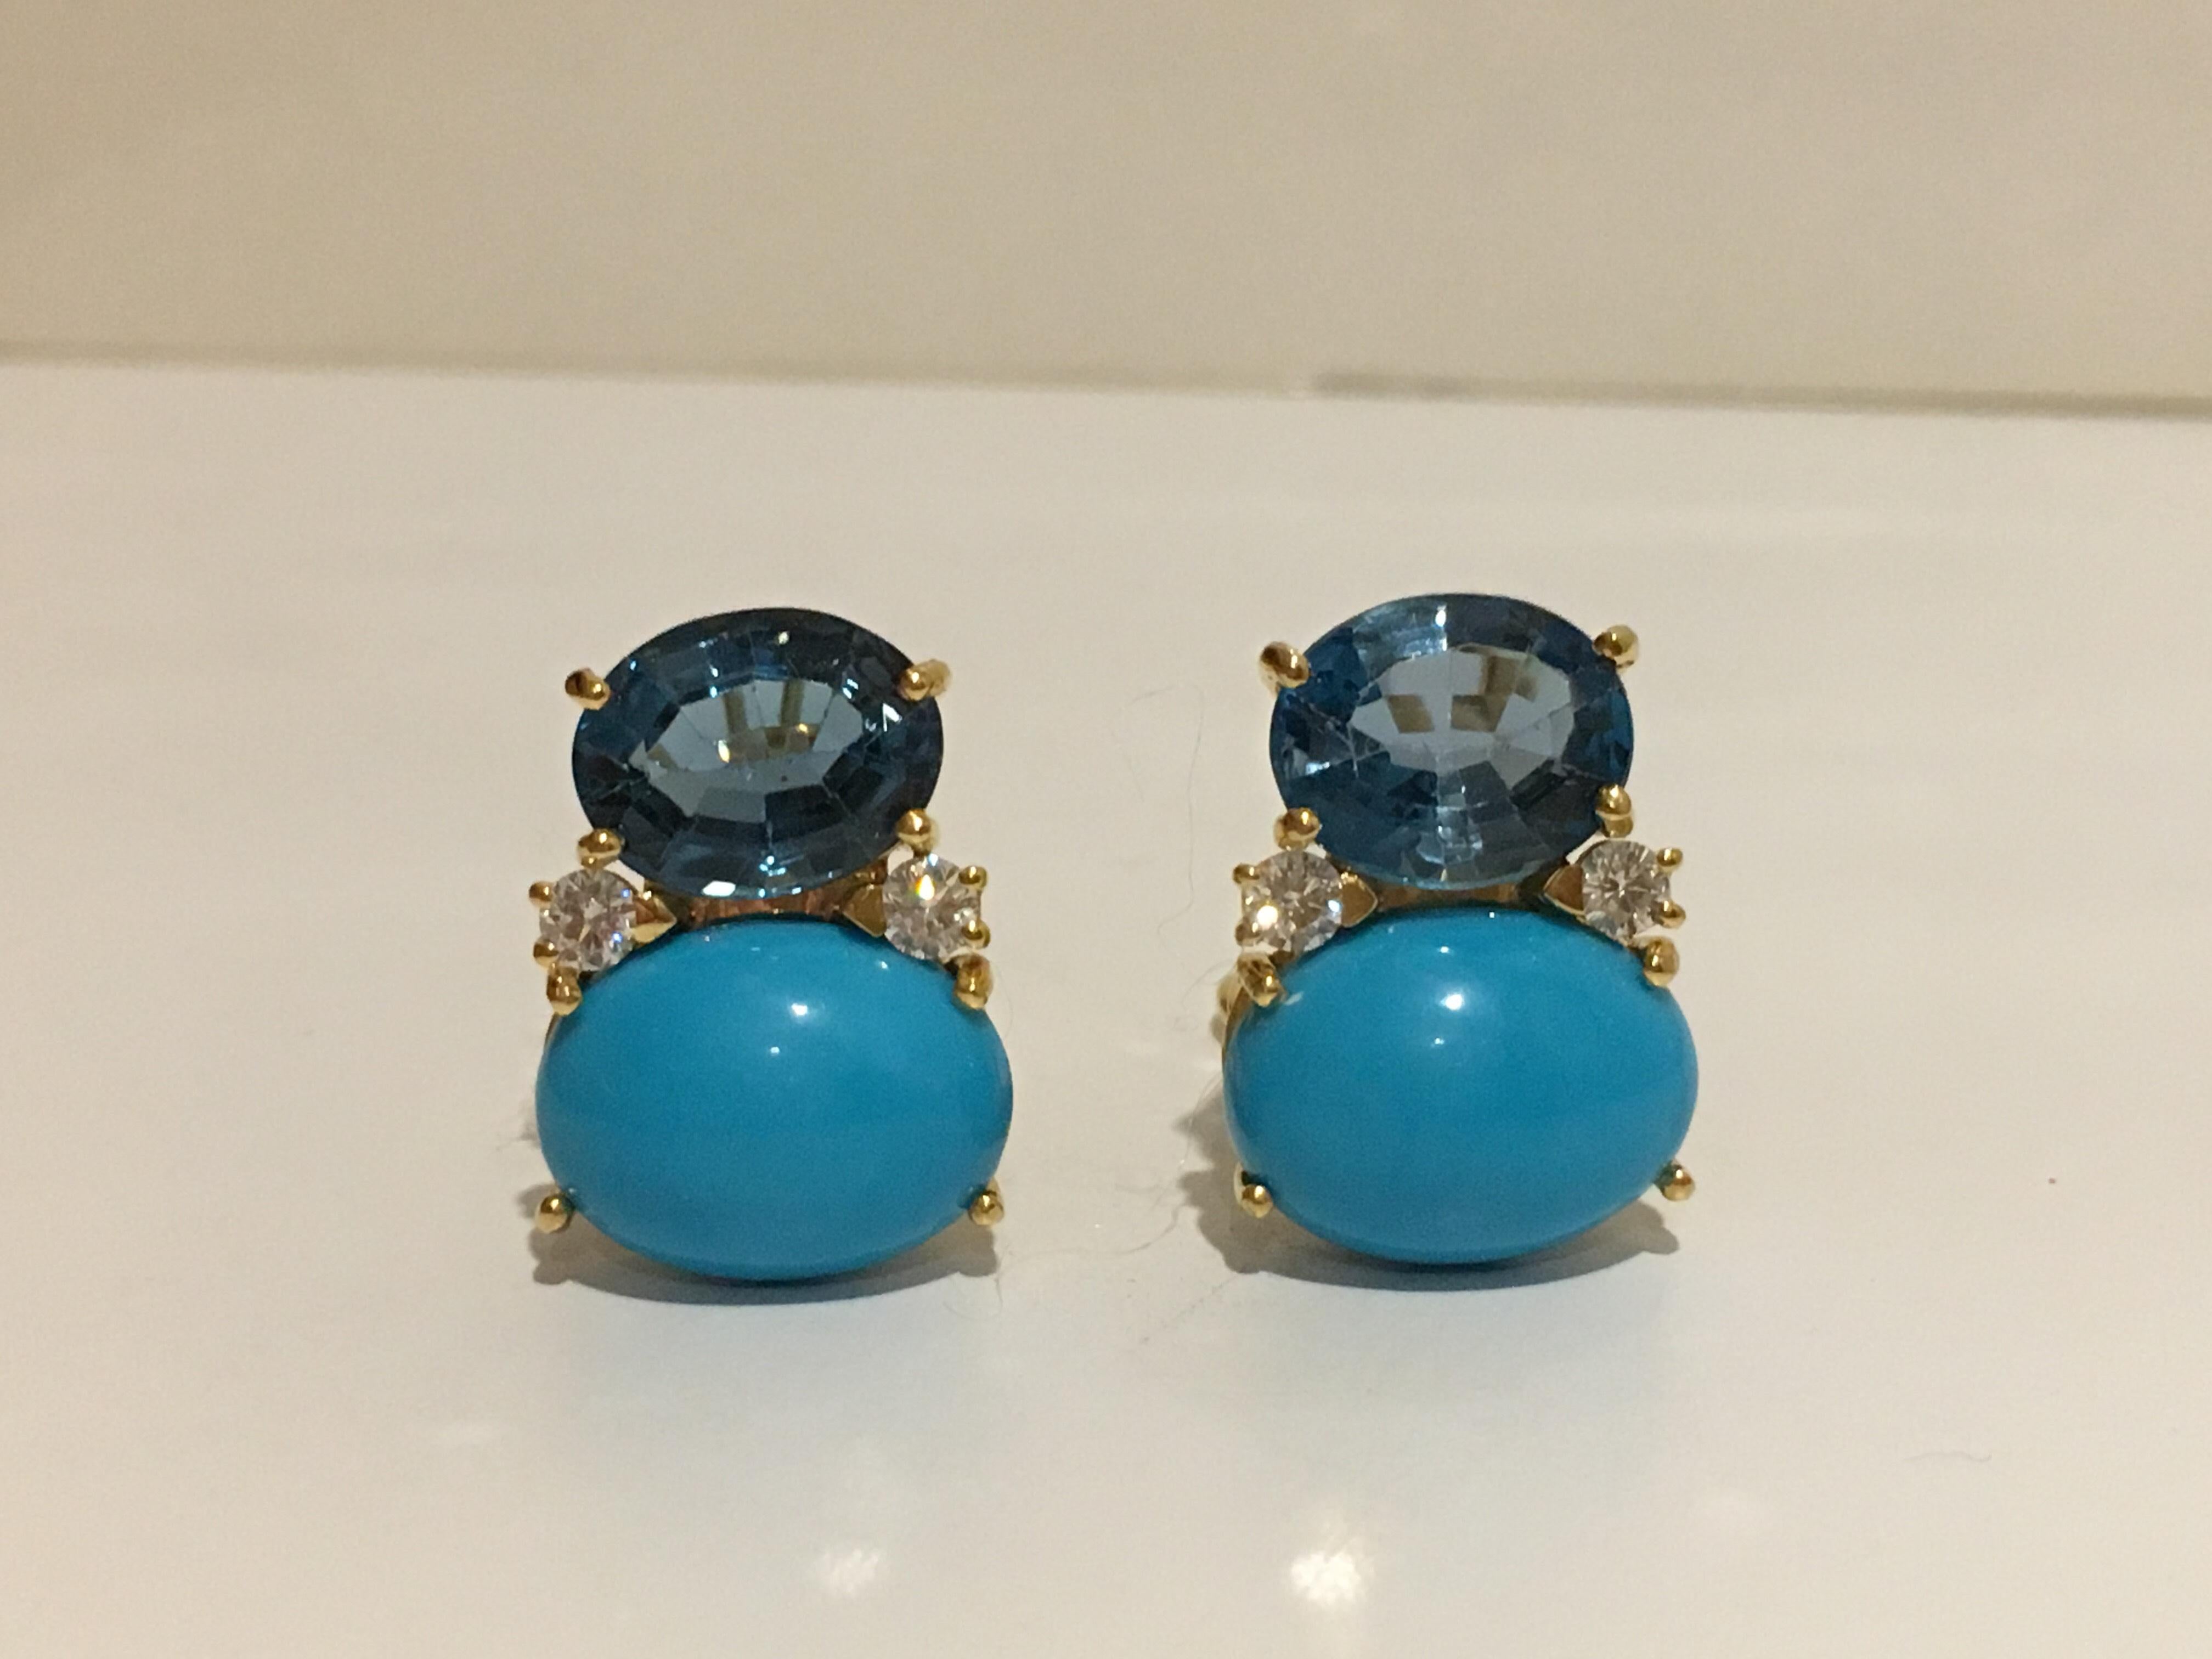 Large Gum Drop Earrings with Blue Topaz, Turquoise and Diamonds Clip or Pierced For Sale 5